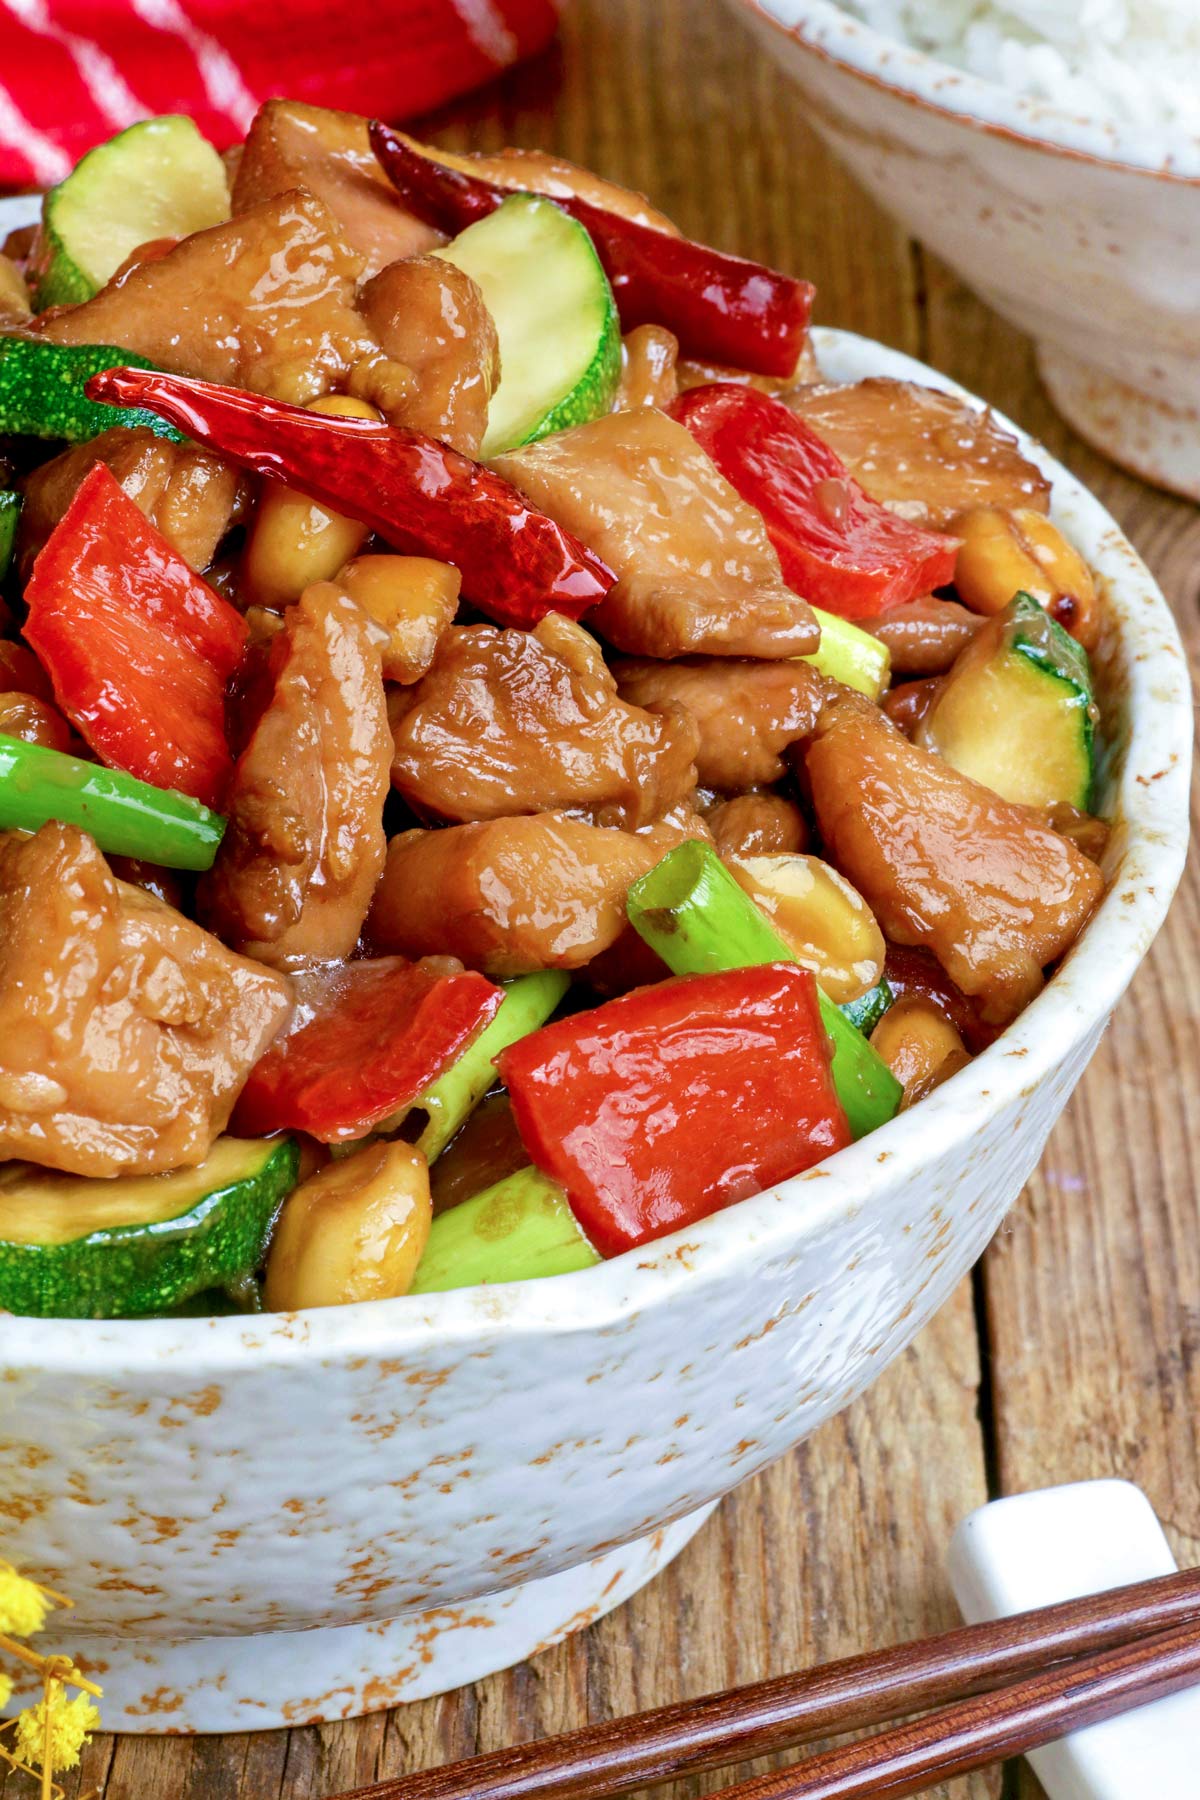 A scrumptious stir-fried chicken dish with the perfect balance of salty, sweet, and spicy flavors. 